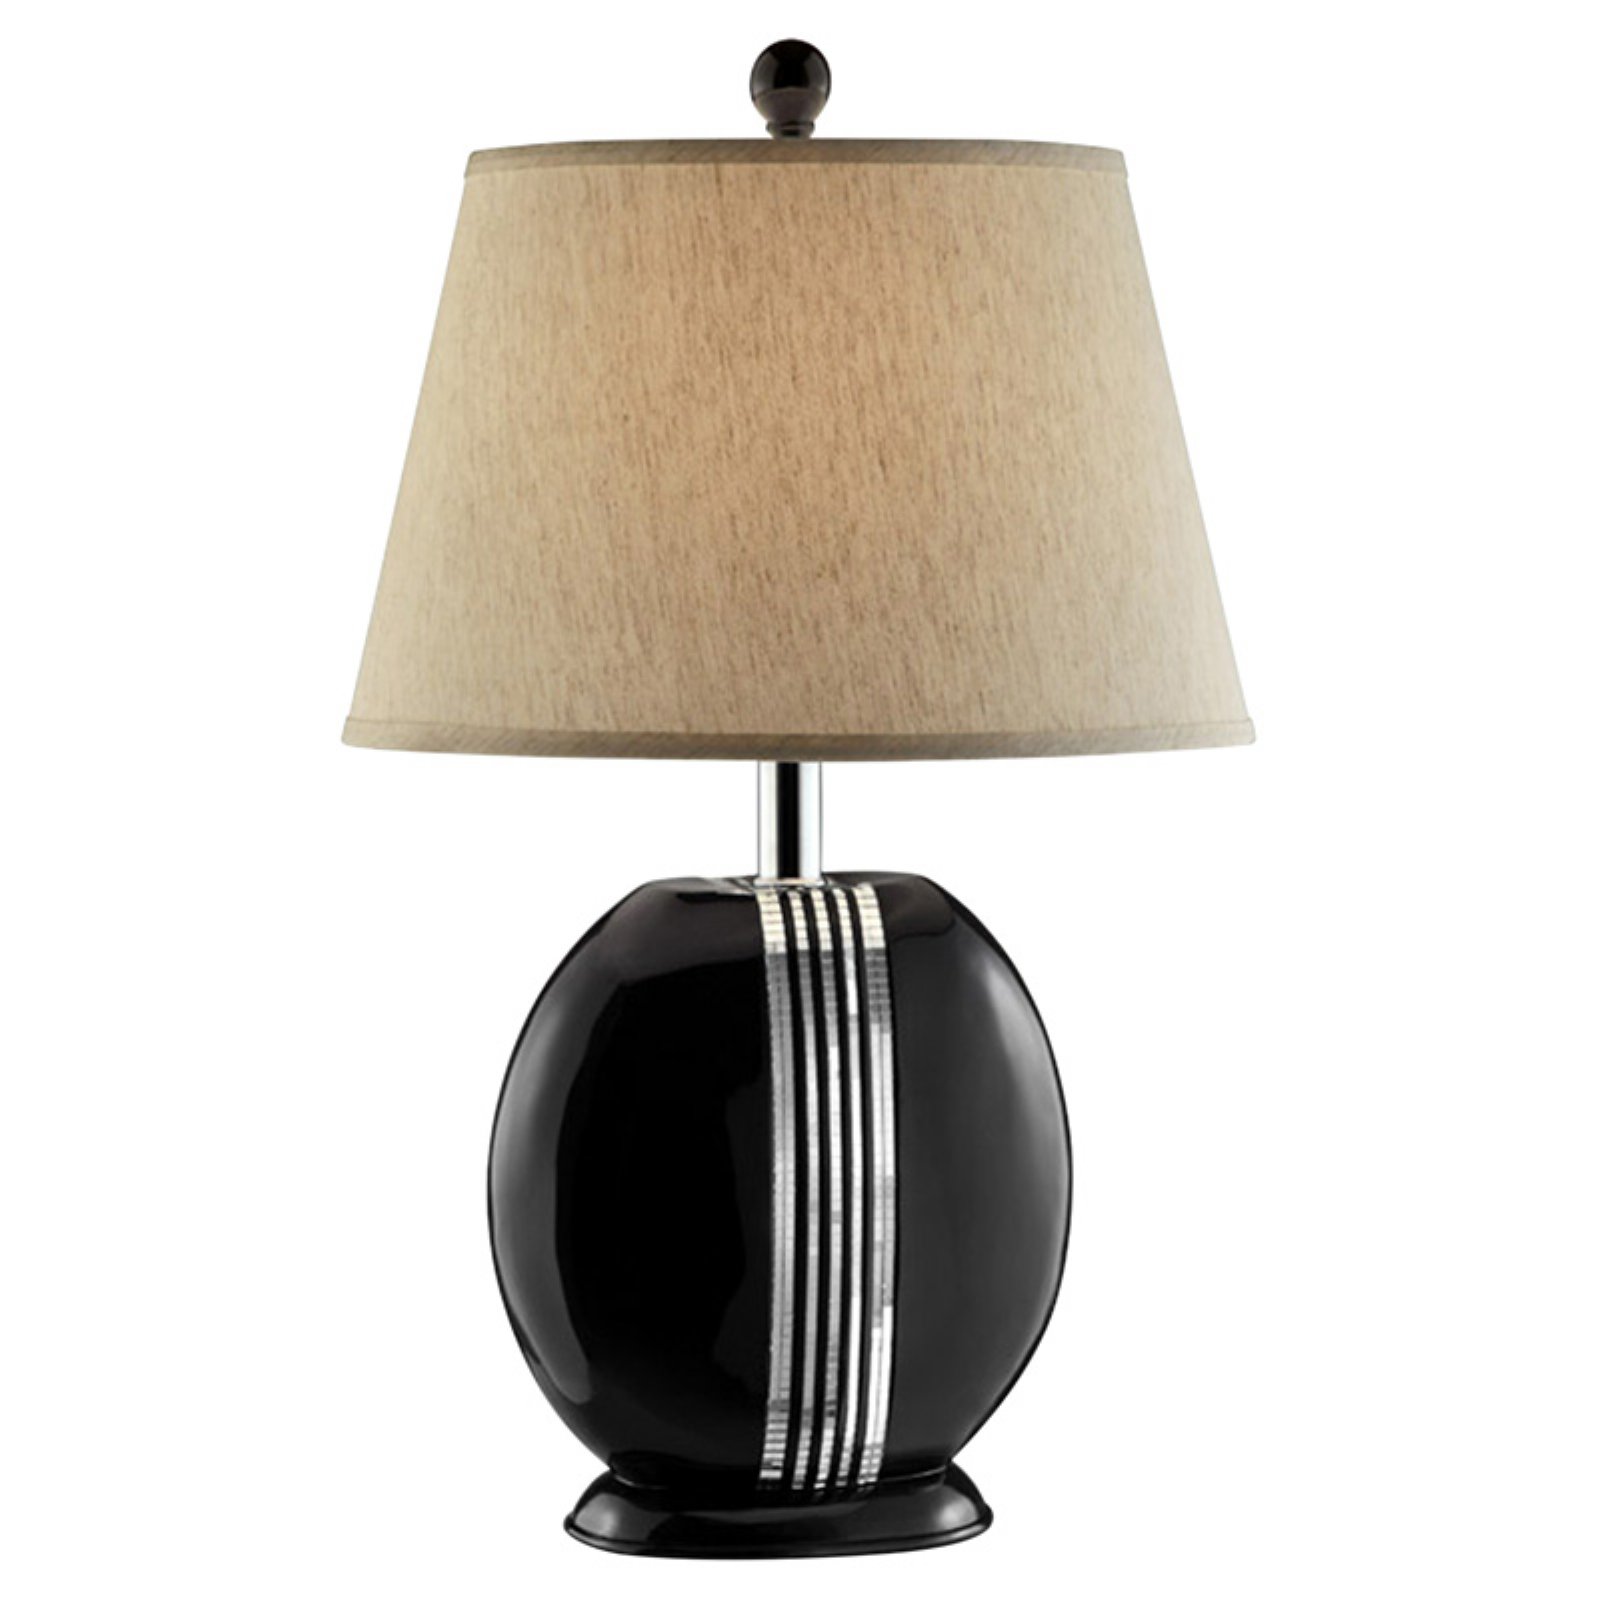 Ore International 28" Obsidian Table Lamp - image 1 of 2